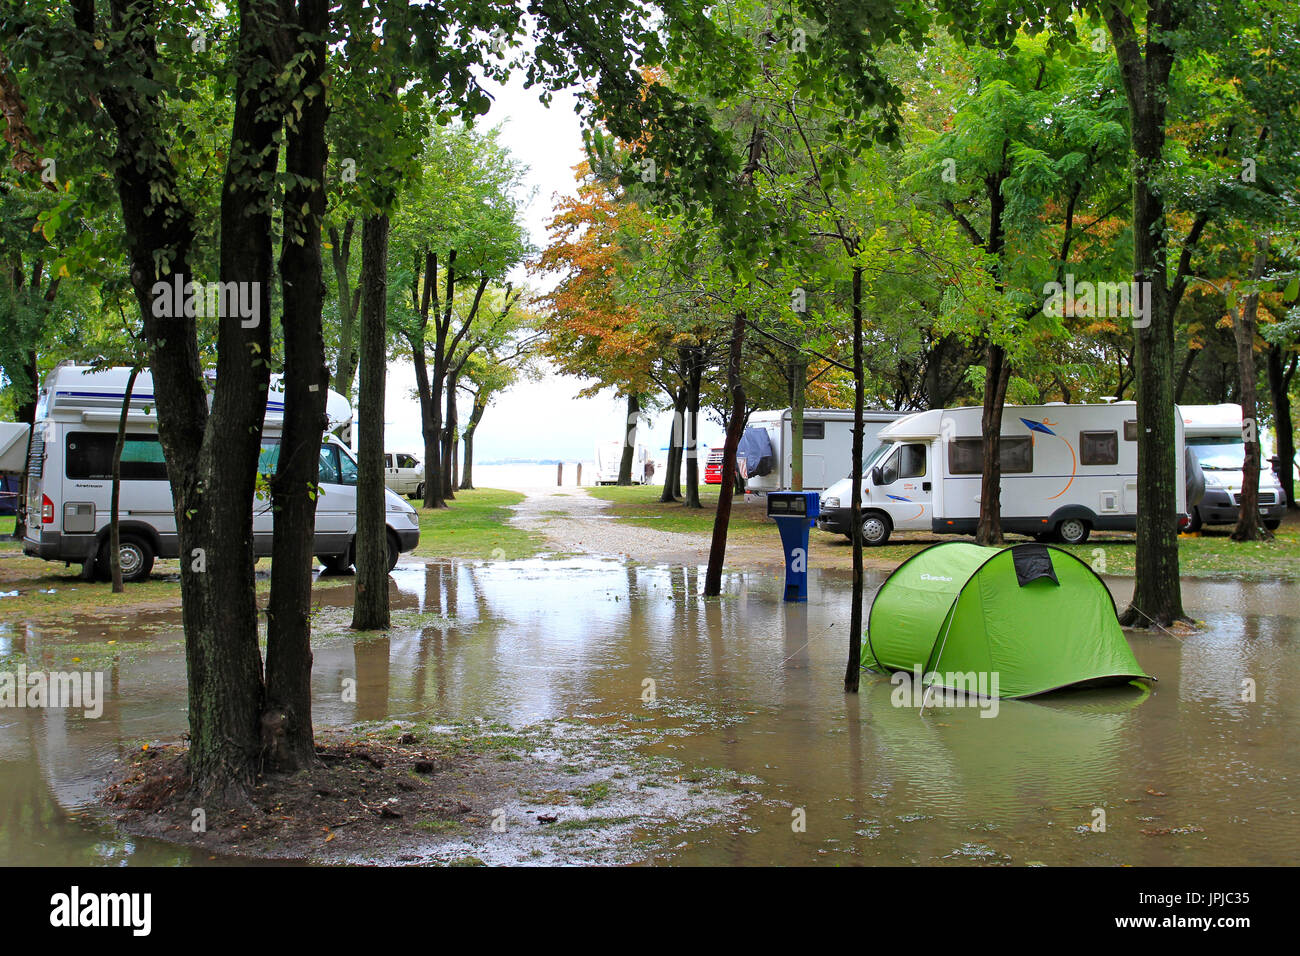 Flood, Flooded campground near Venice, after a thunderstorm, Venice, Italy, Europe Stock Photo